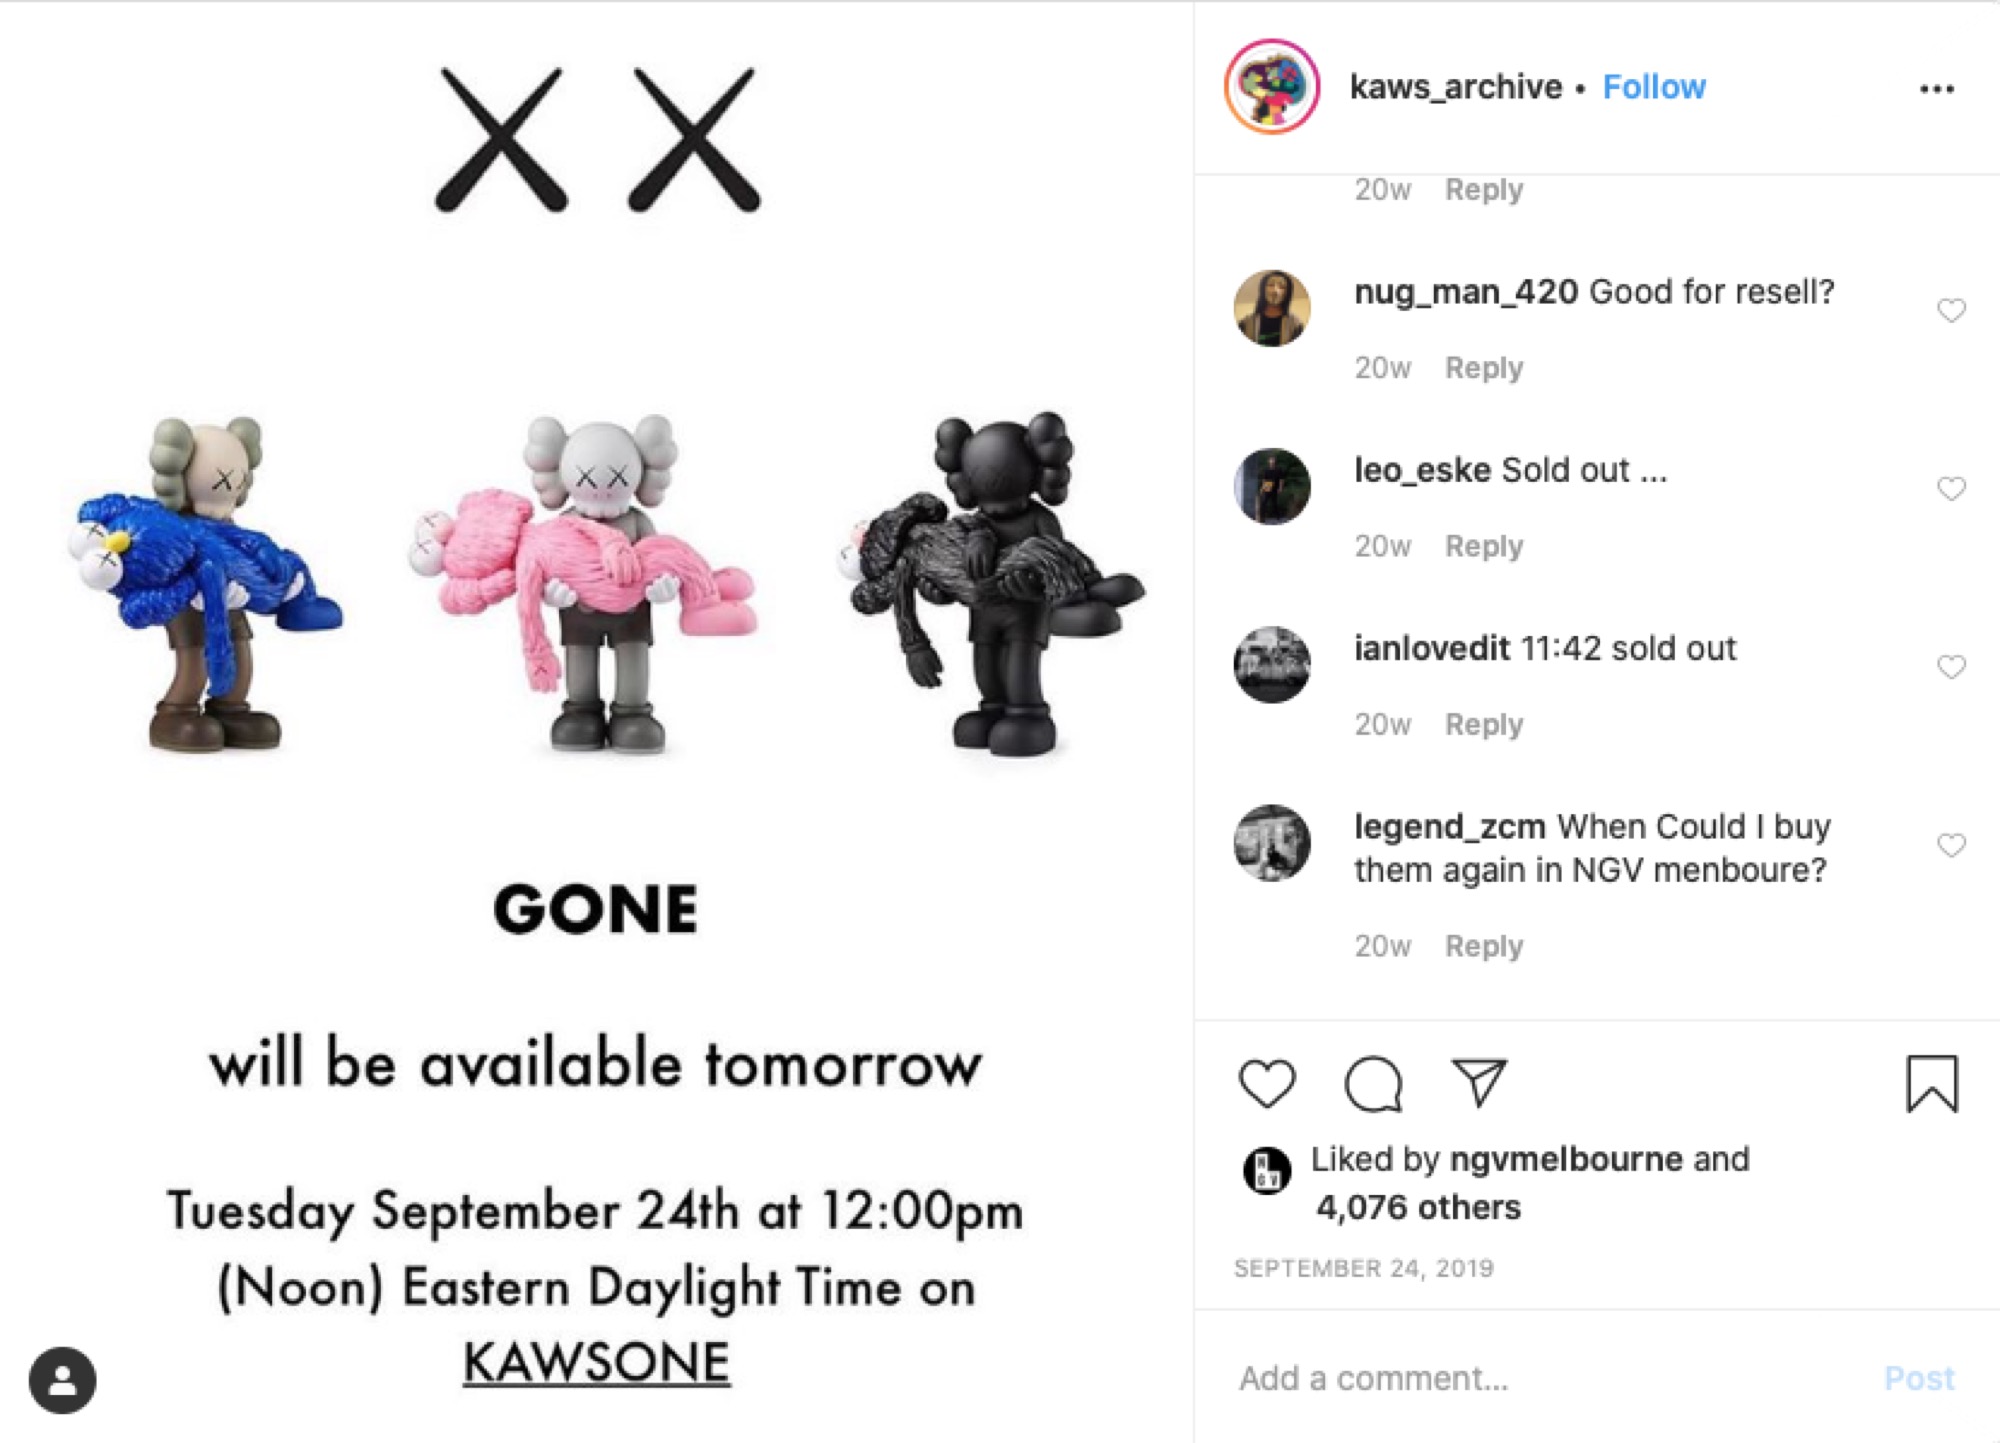 https://account.memoreview.net/media/pages/reviews/kaws-companionship-in-the-age-of-loneliness/1695a82476-1635804895/screen-shot-2020-02-15-at-1.43.21-am.jpg